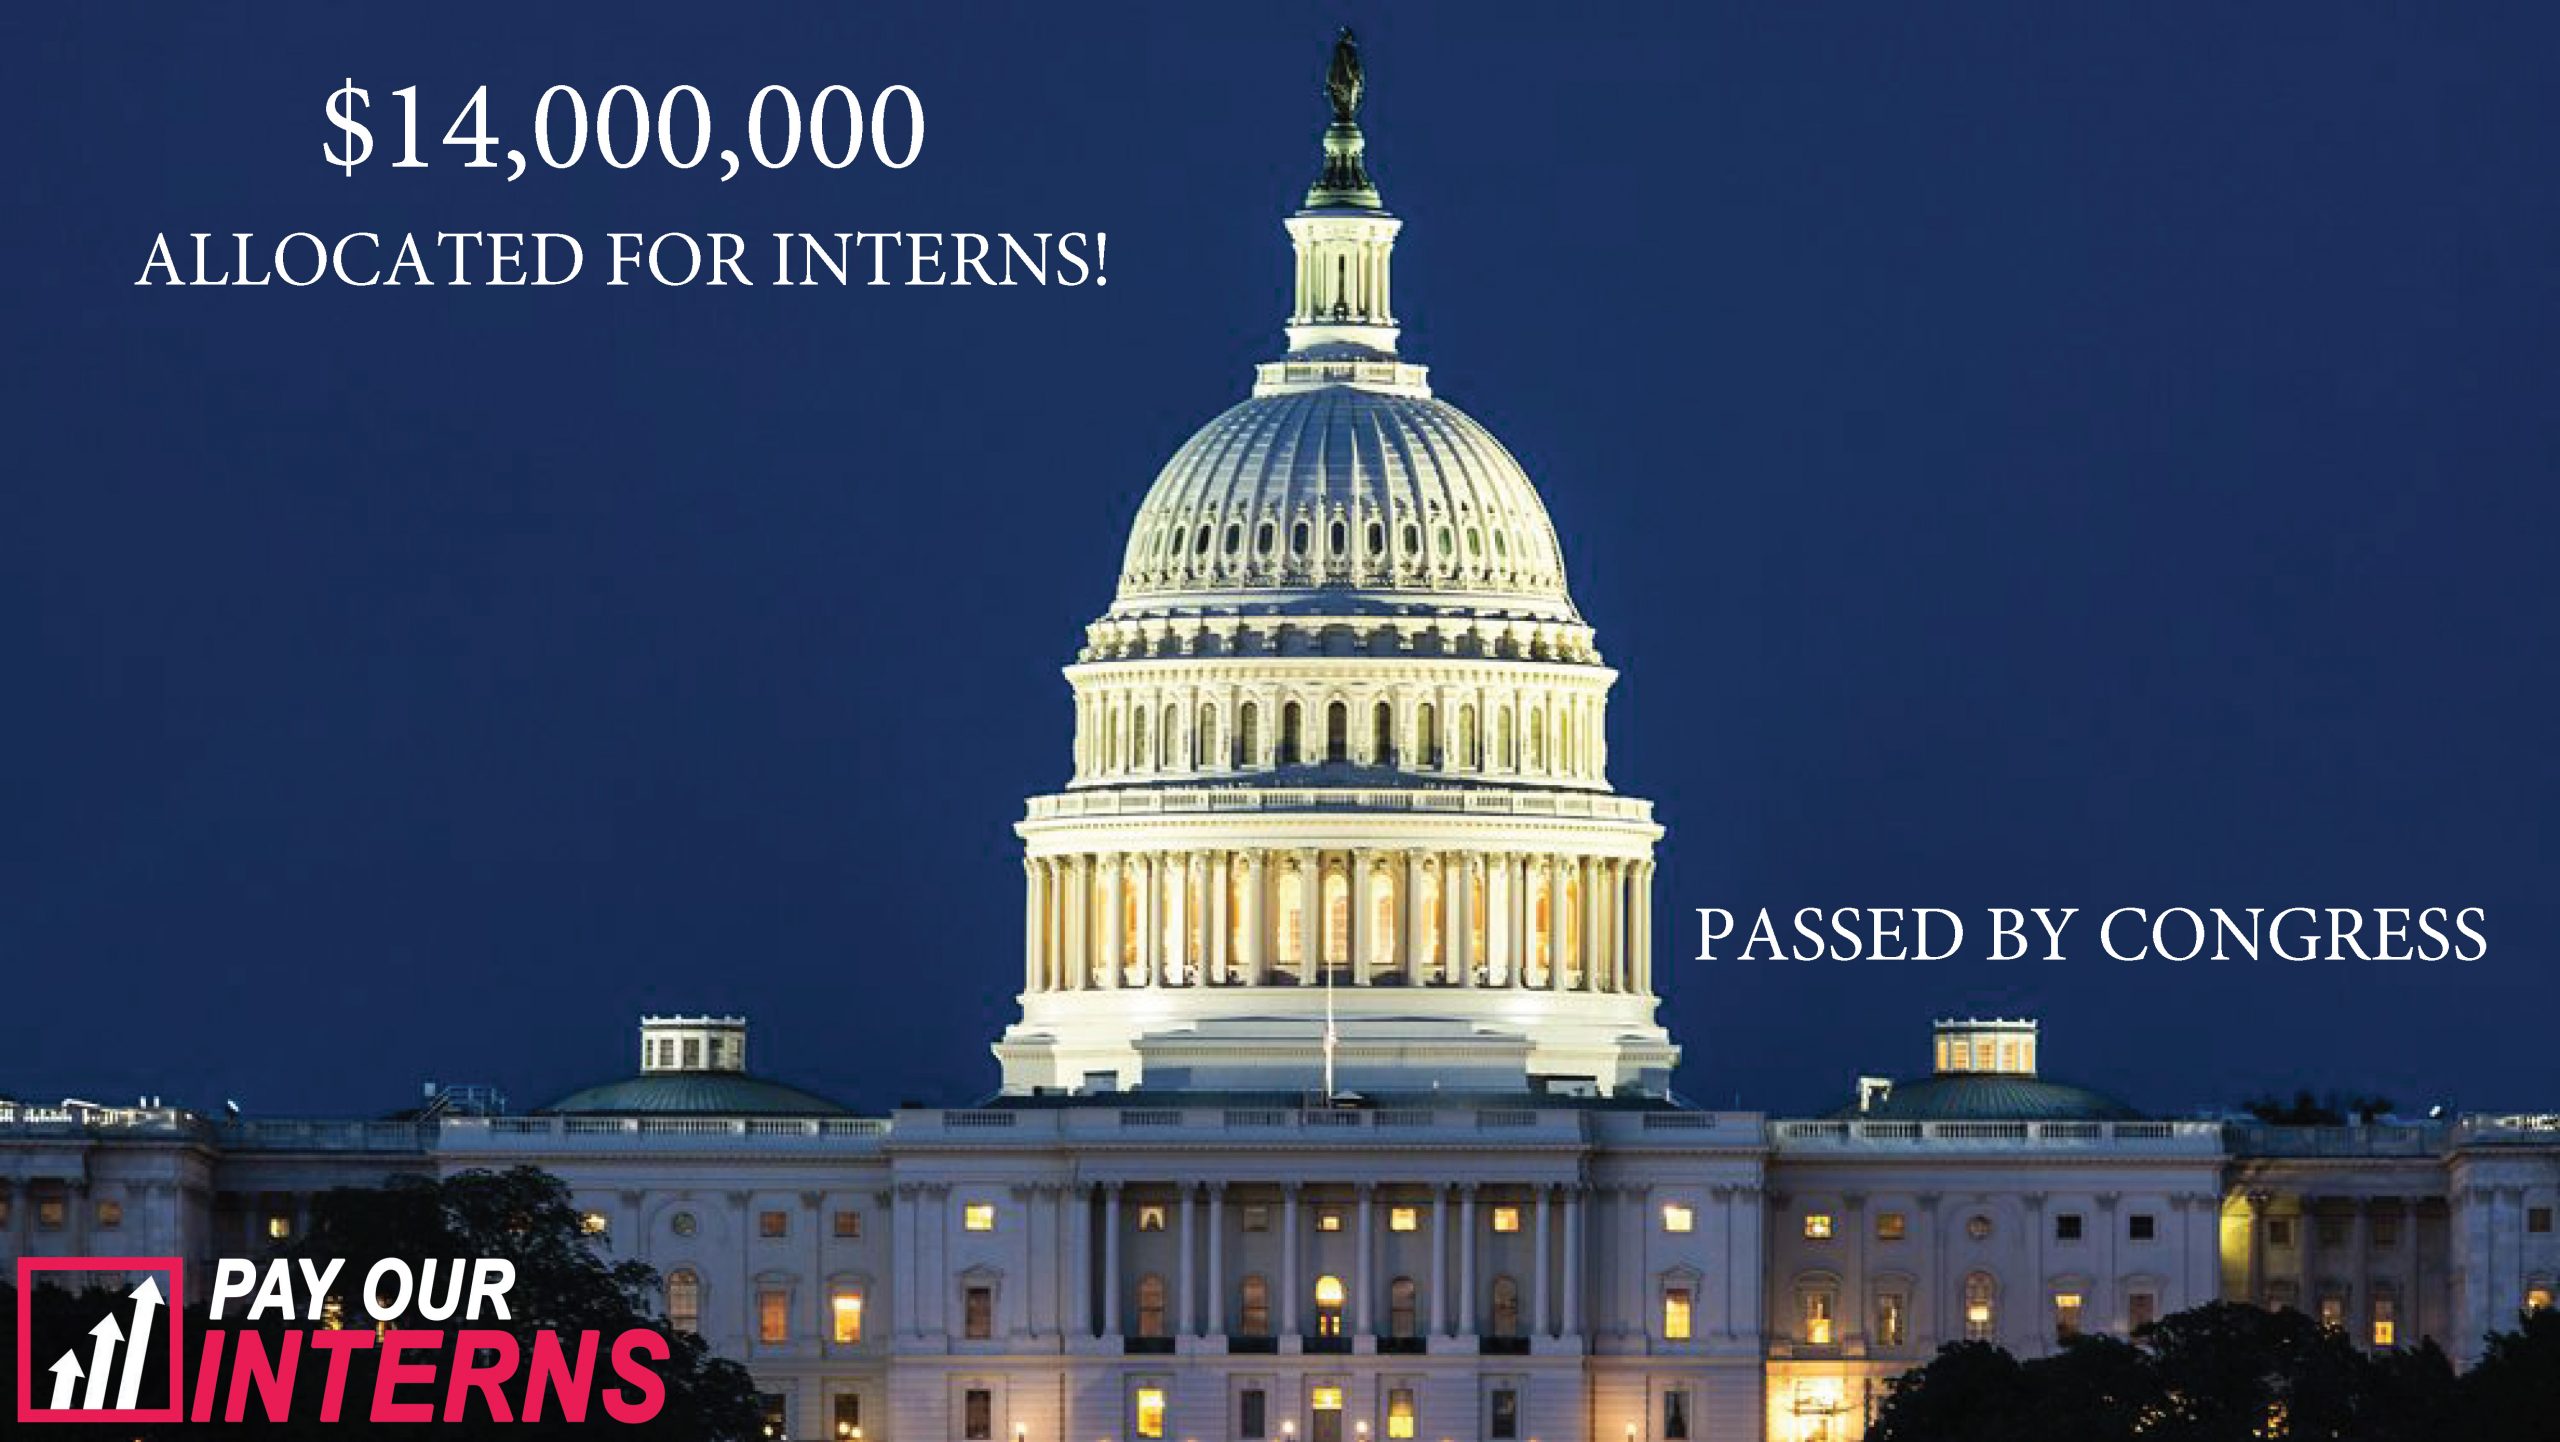 VICTORY! House and Senate Approve $14 Million in Funding to Pay Interns